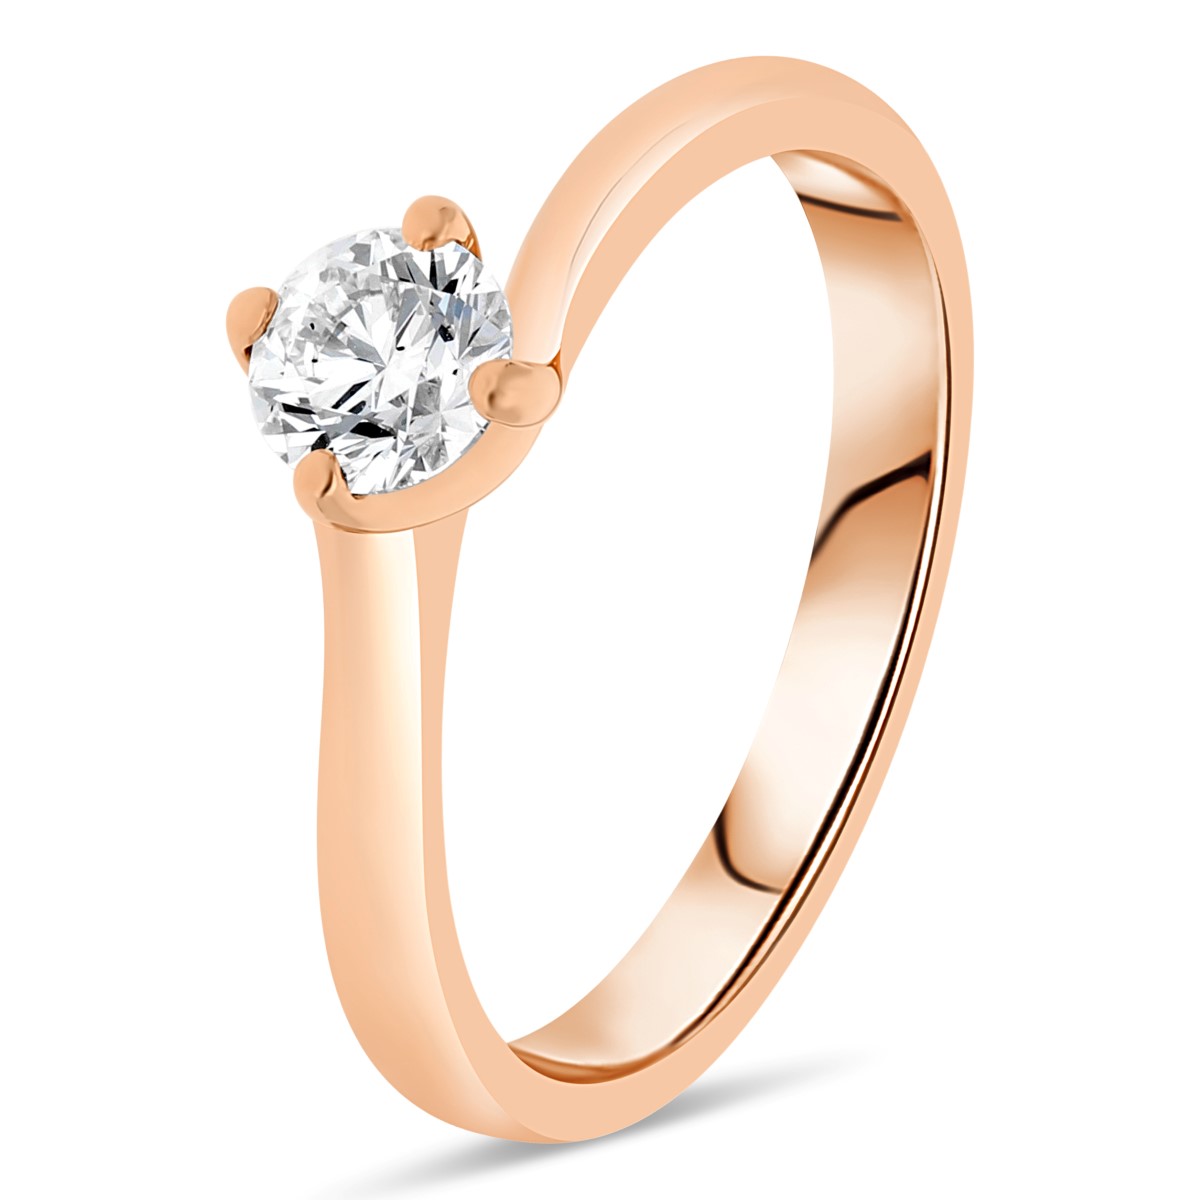 papeete-or-solitaires-diamants-certifies-style-classique-or-rose-750-